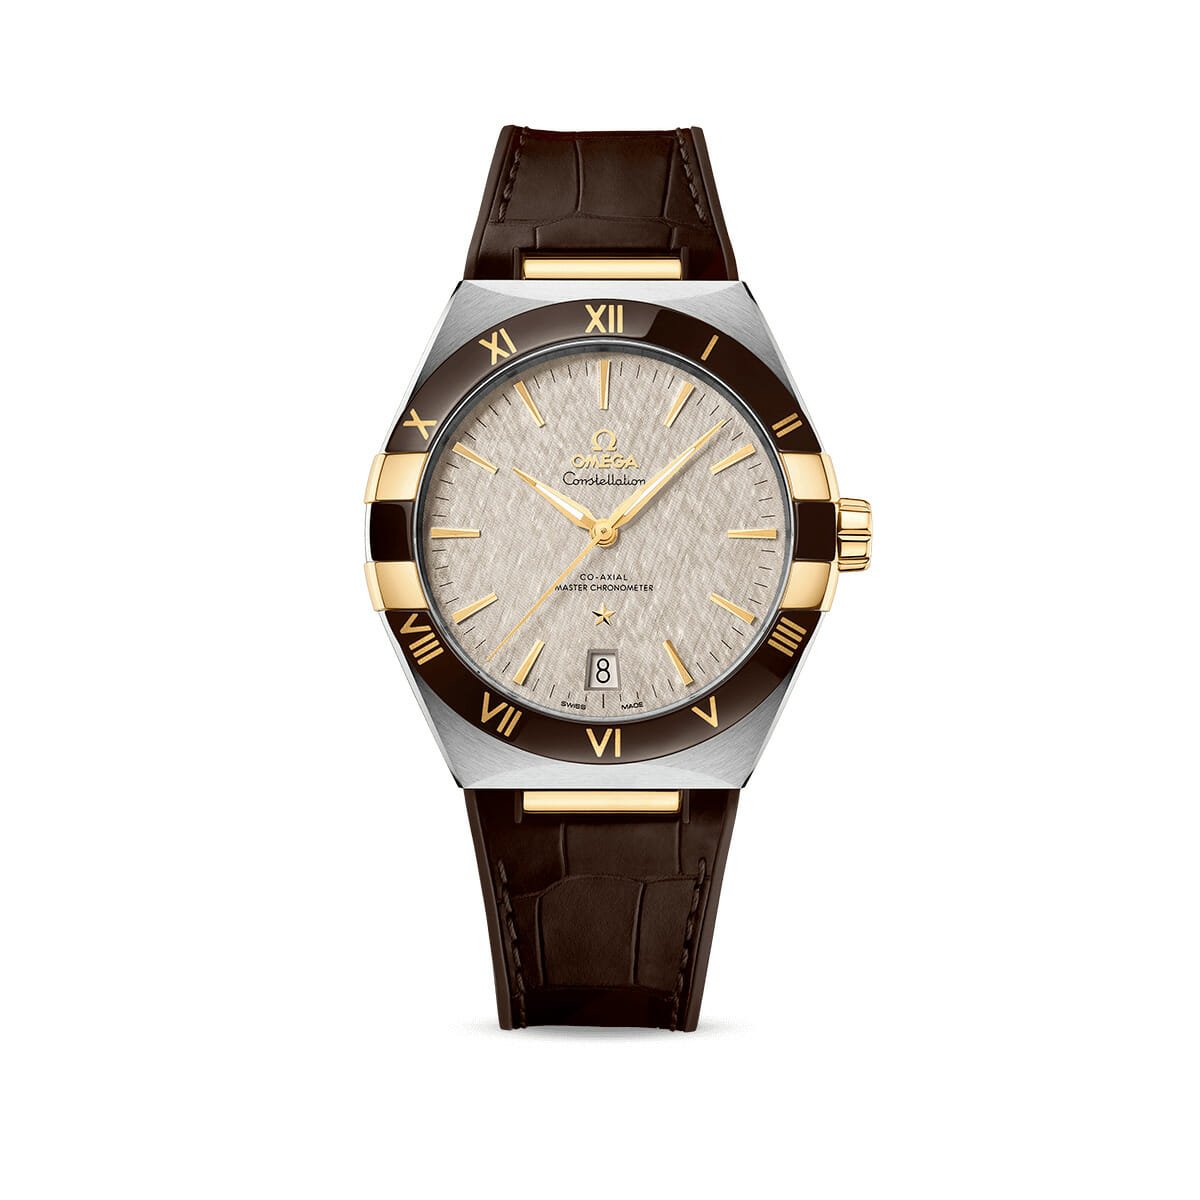 Constellation Co-Axial Master Chronometer 41mm Watch